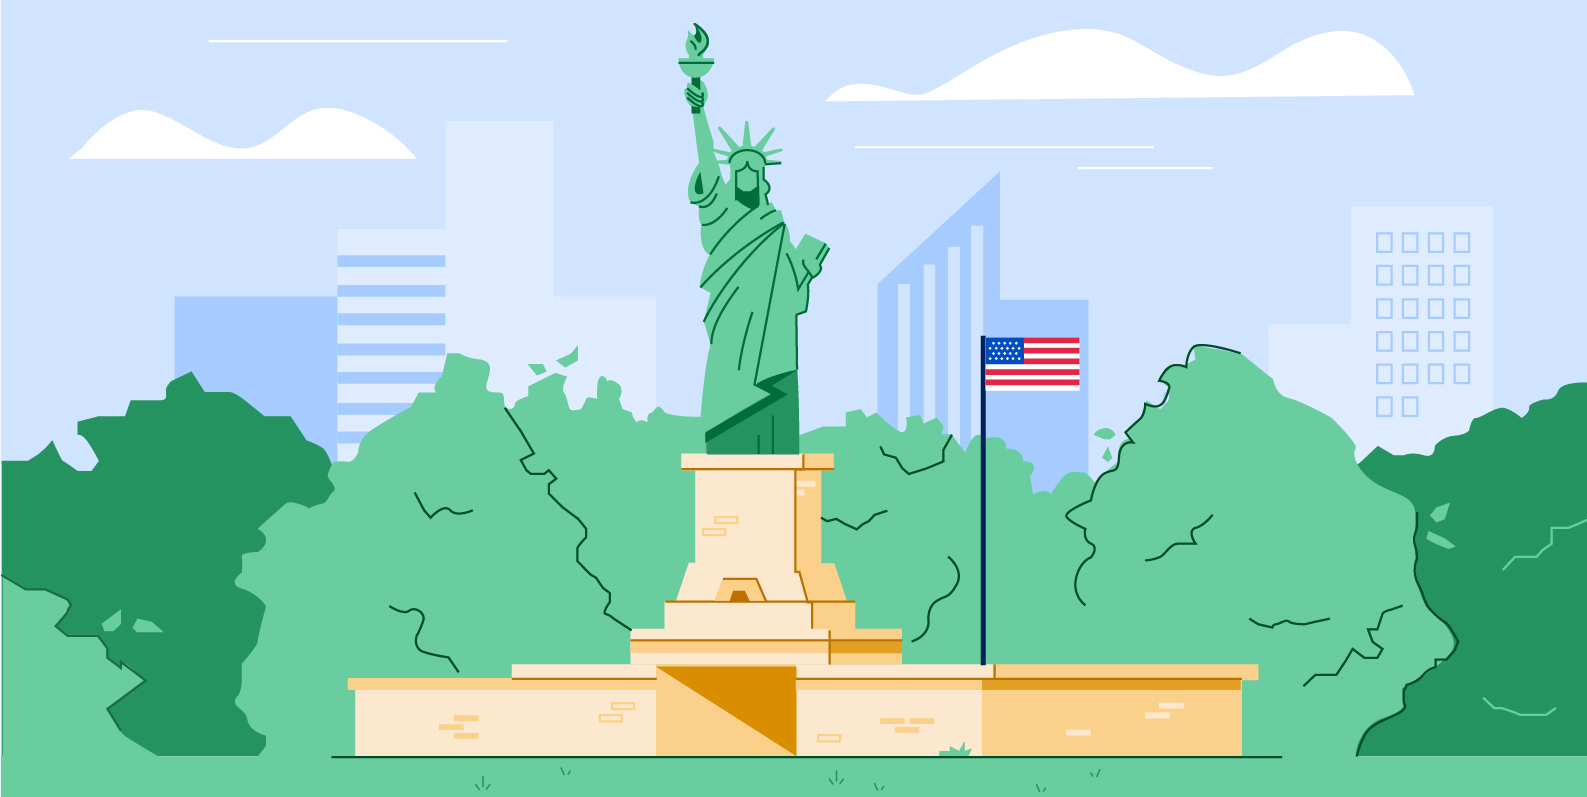 Image of the Statue of Liberty beside an American flag